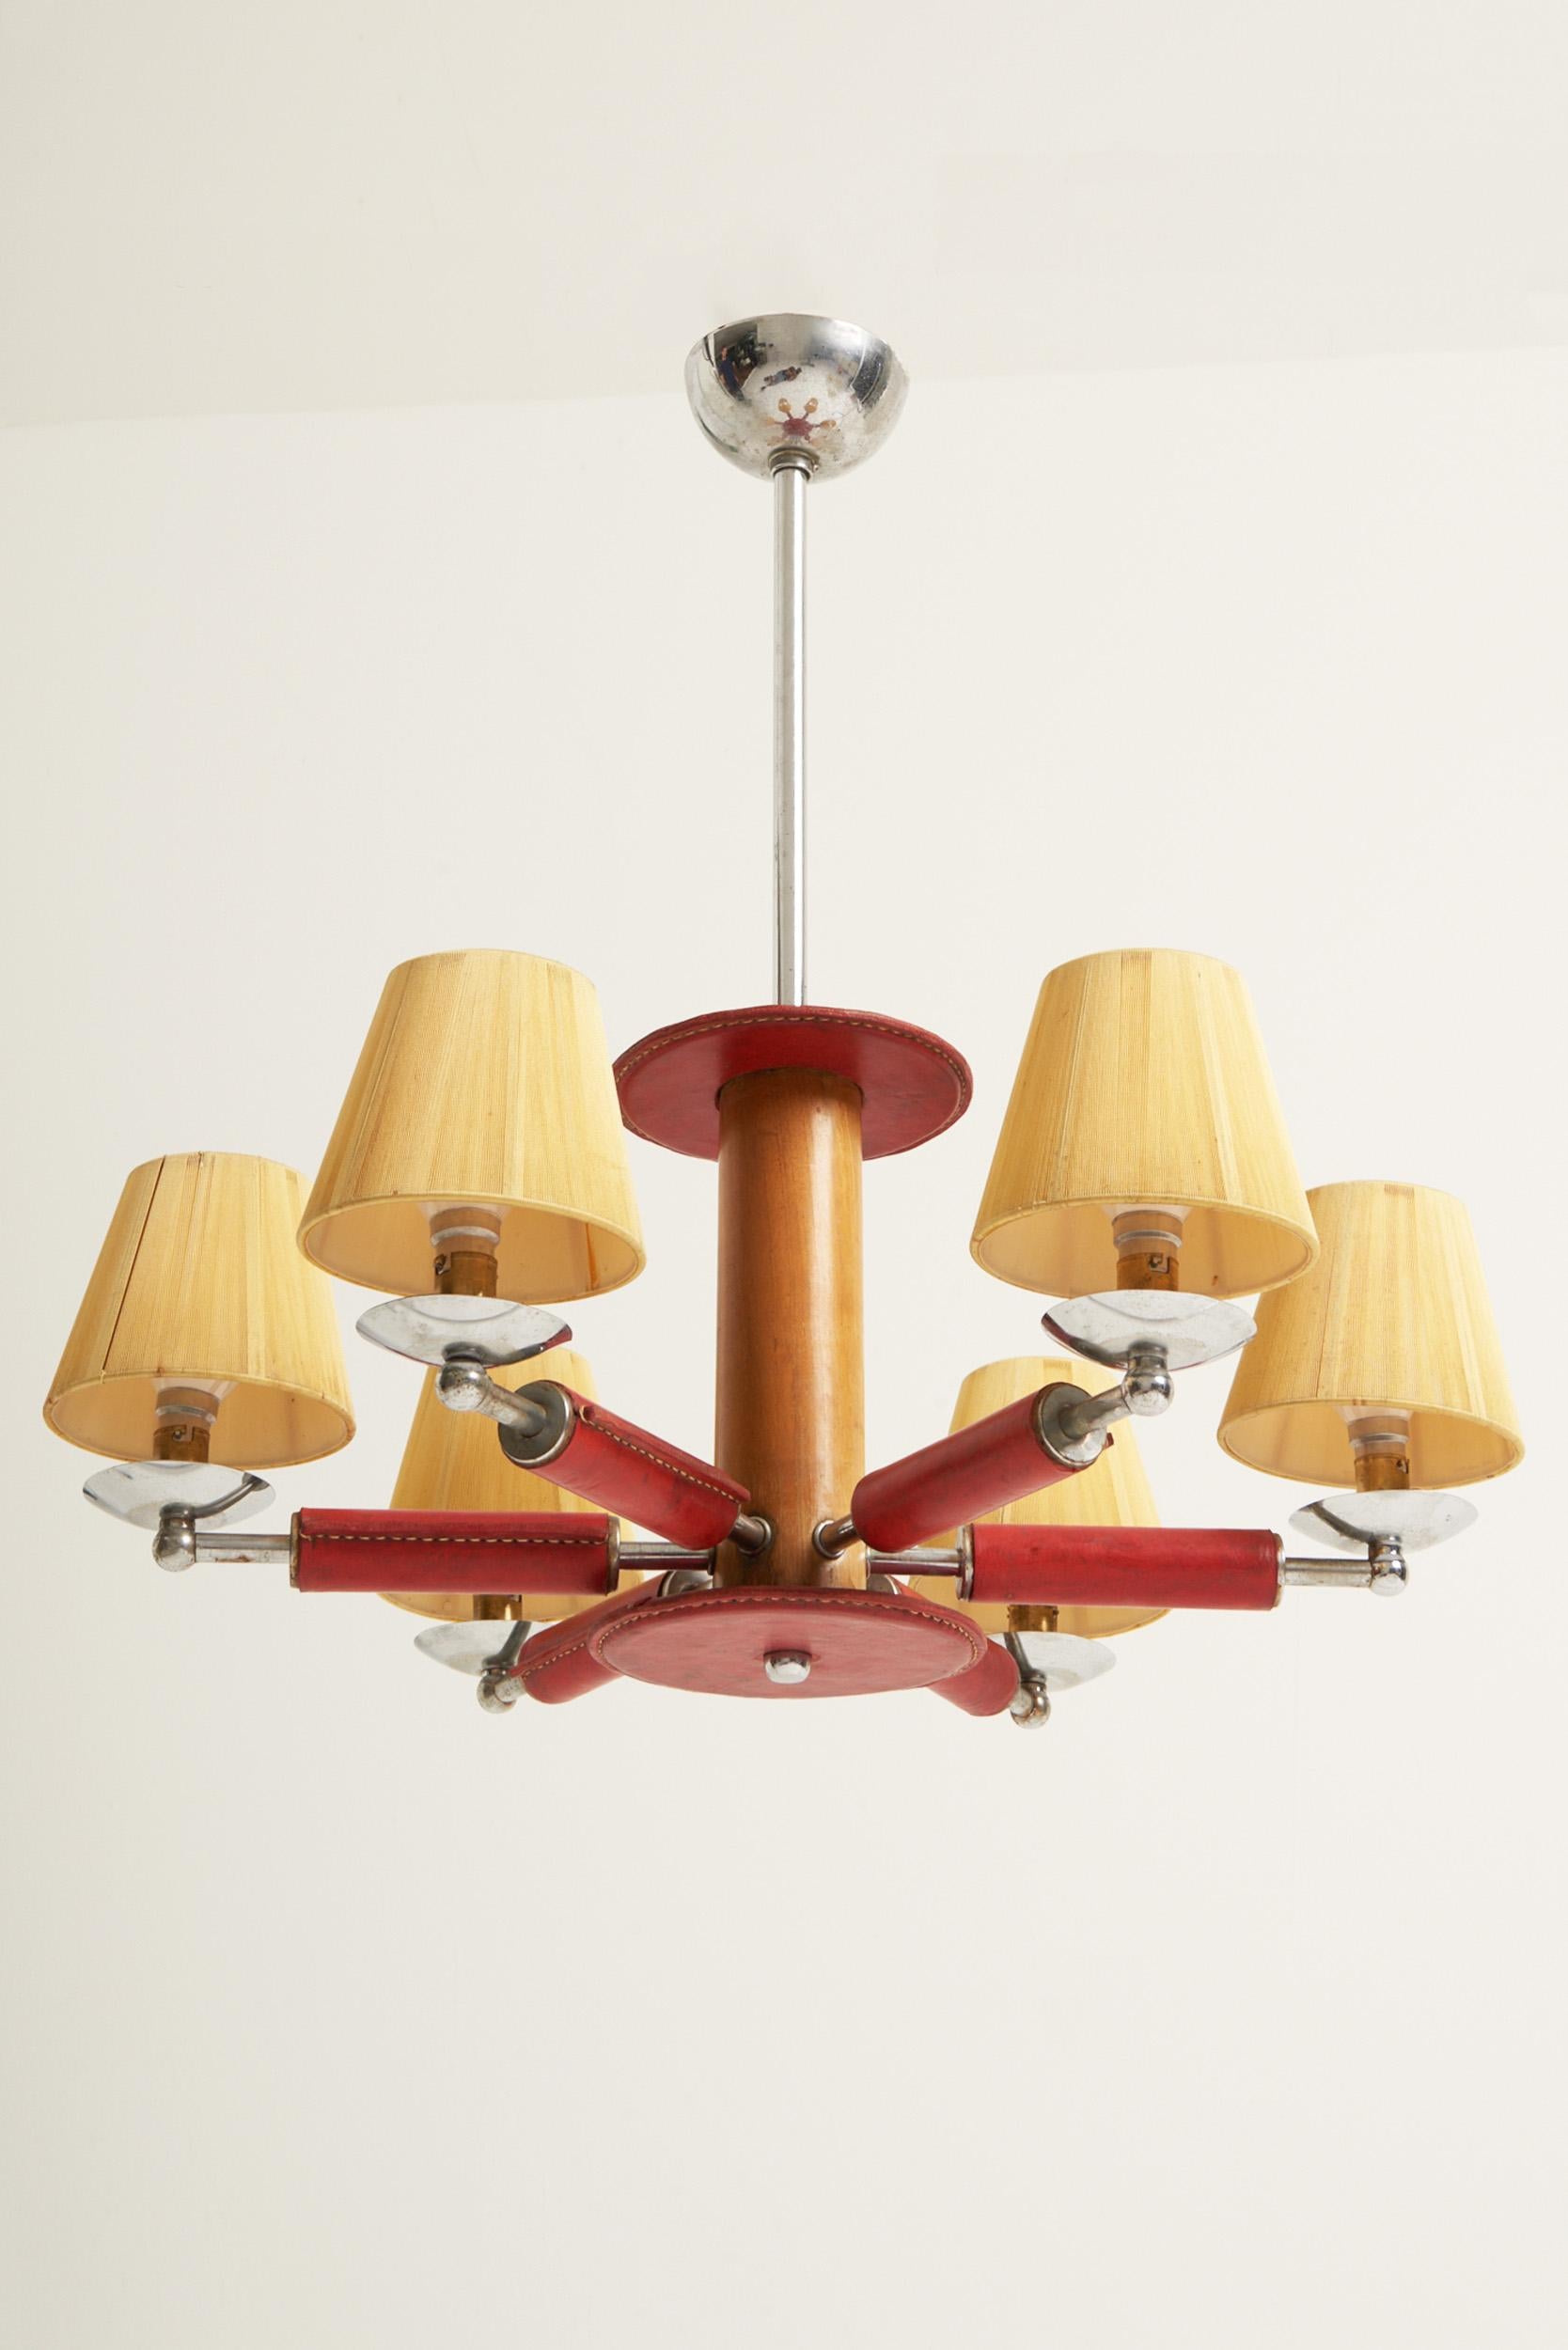 Mid-Century Modern Red Leather Ceiling Light by Jacques Adnet (1900-1984)